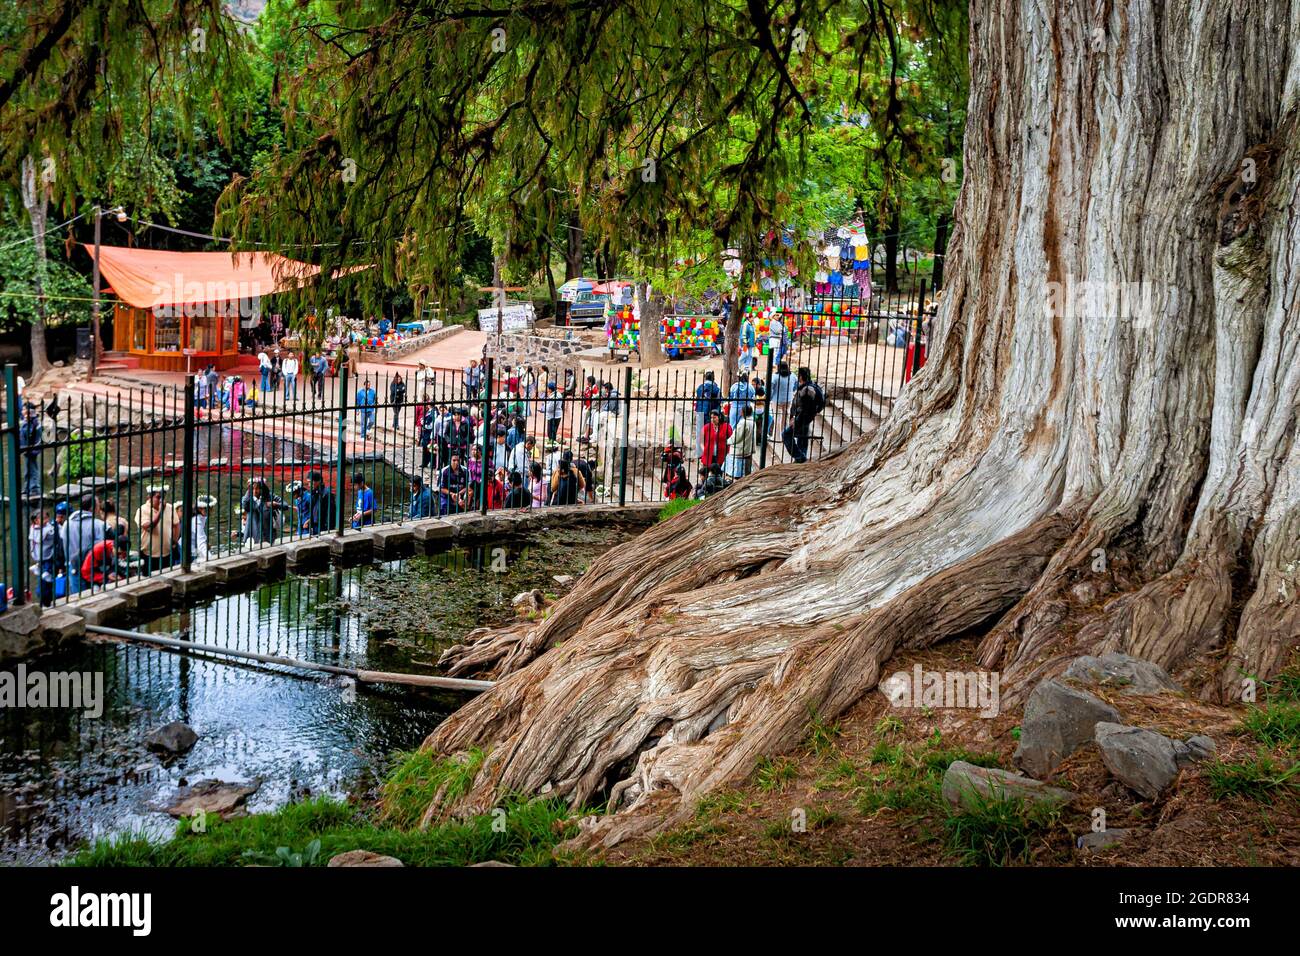 Pilgrims gather to touch the holy waters of the spring below the famed willow tree (Sp. Ahuehuete) in Chalma, Mexico. Stock Photo